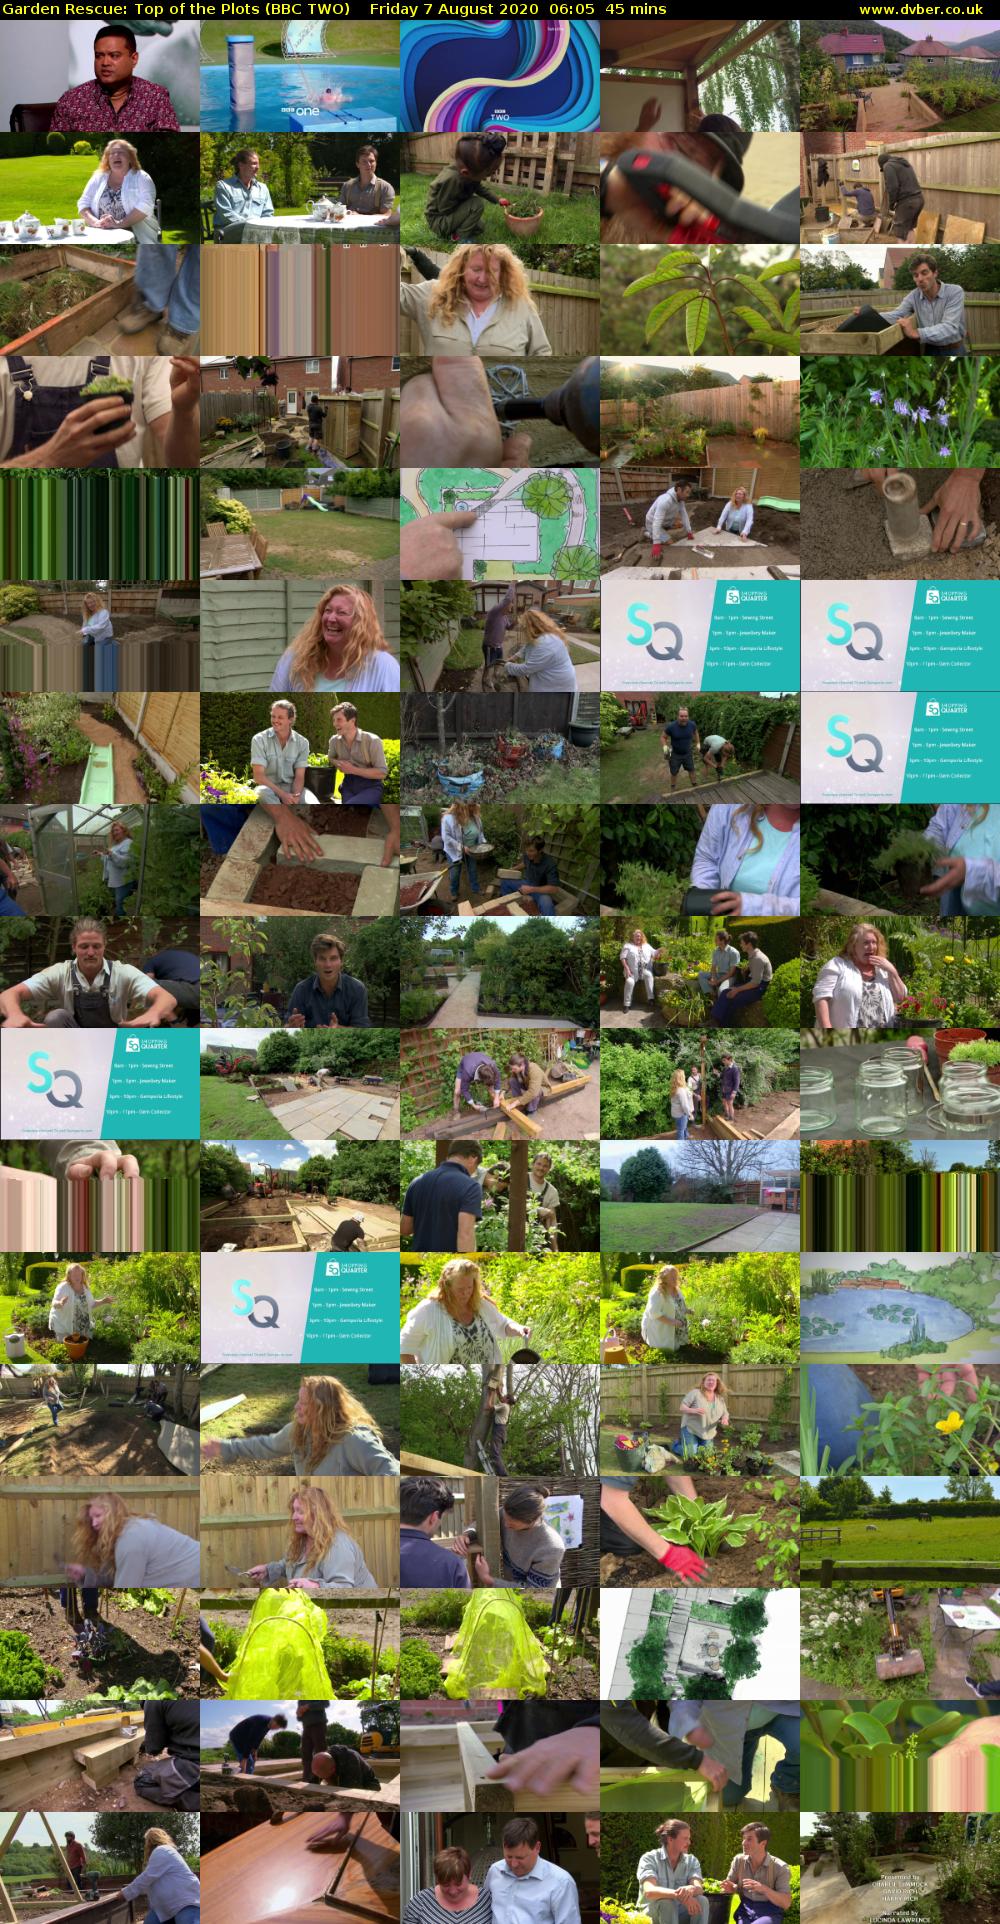 Garden Rescue: Top of the Plots (BBC TWO) Friday 7 August 2020 06:05 - 06:50